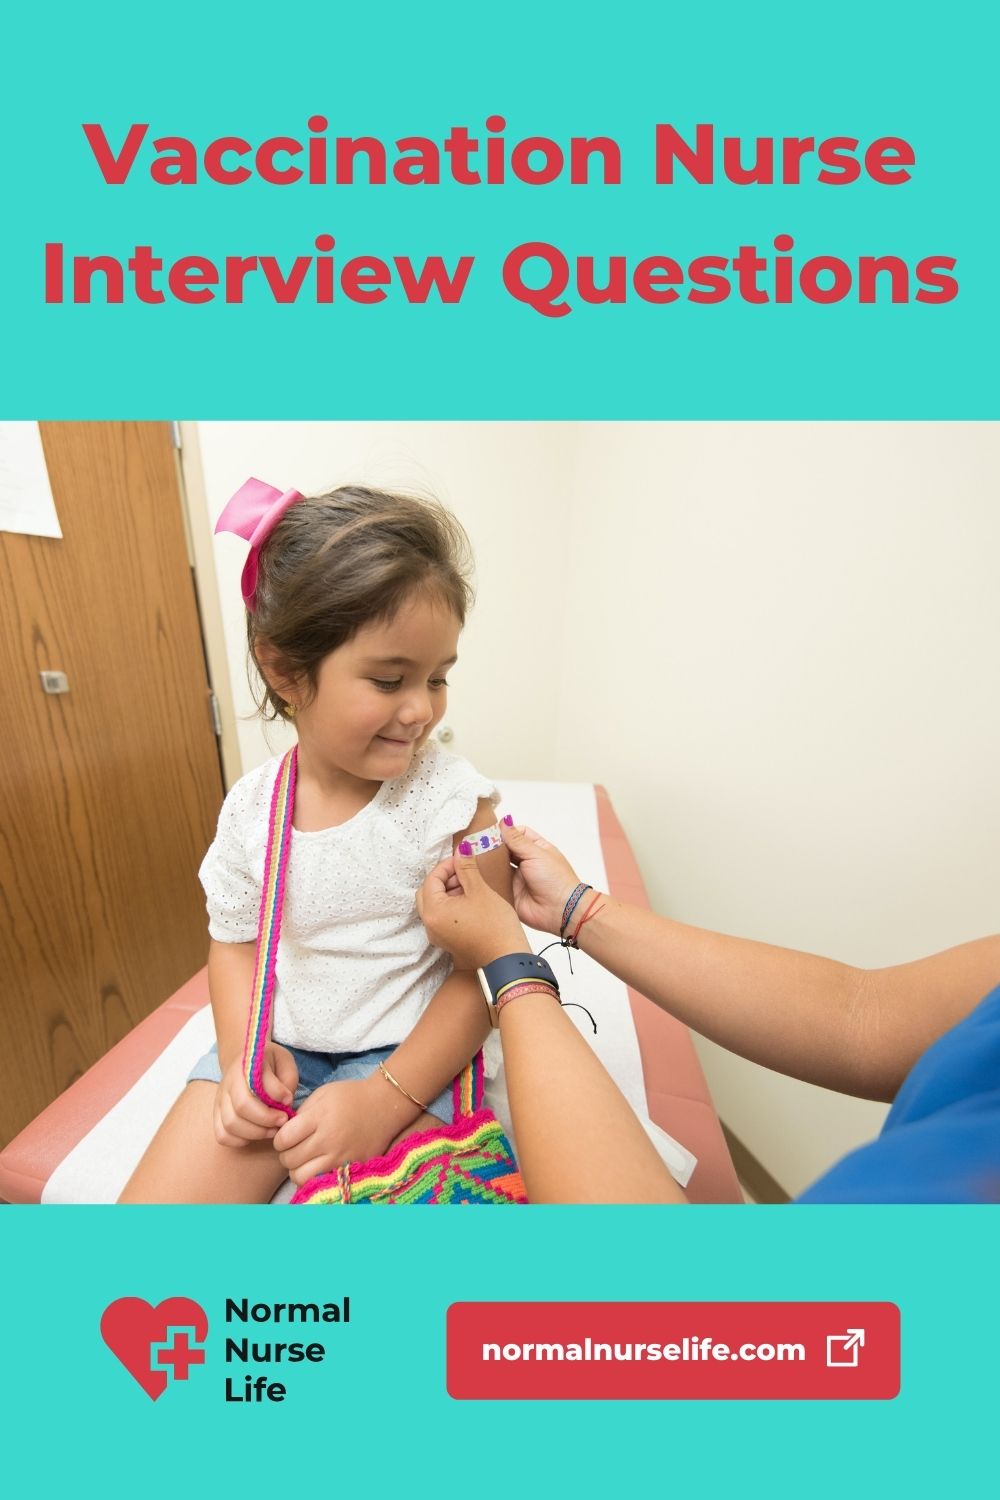 Interview questions for vaccination nurses